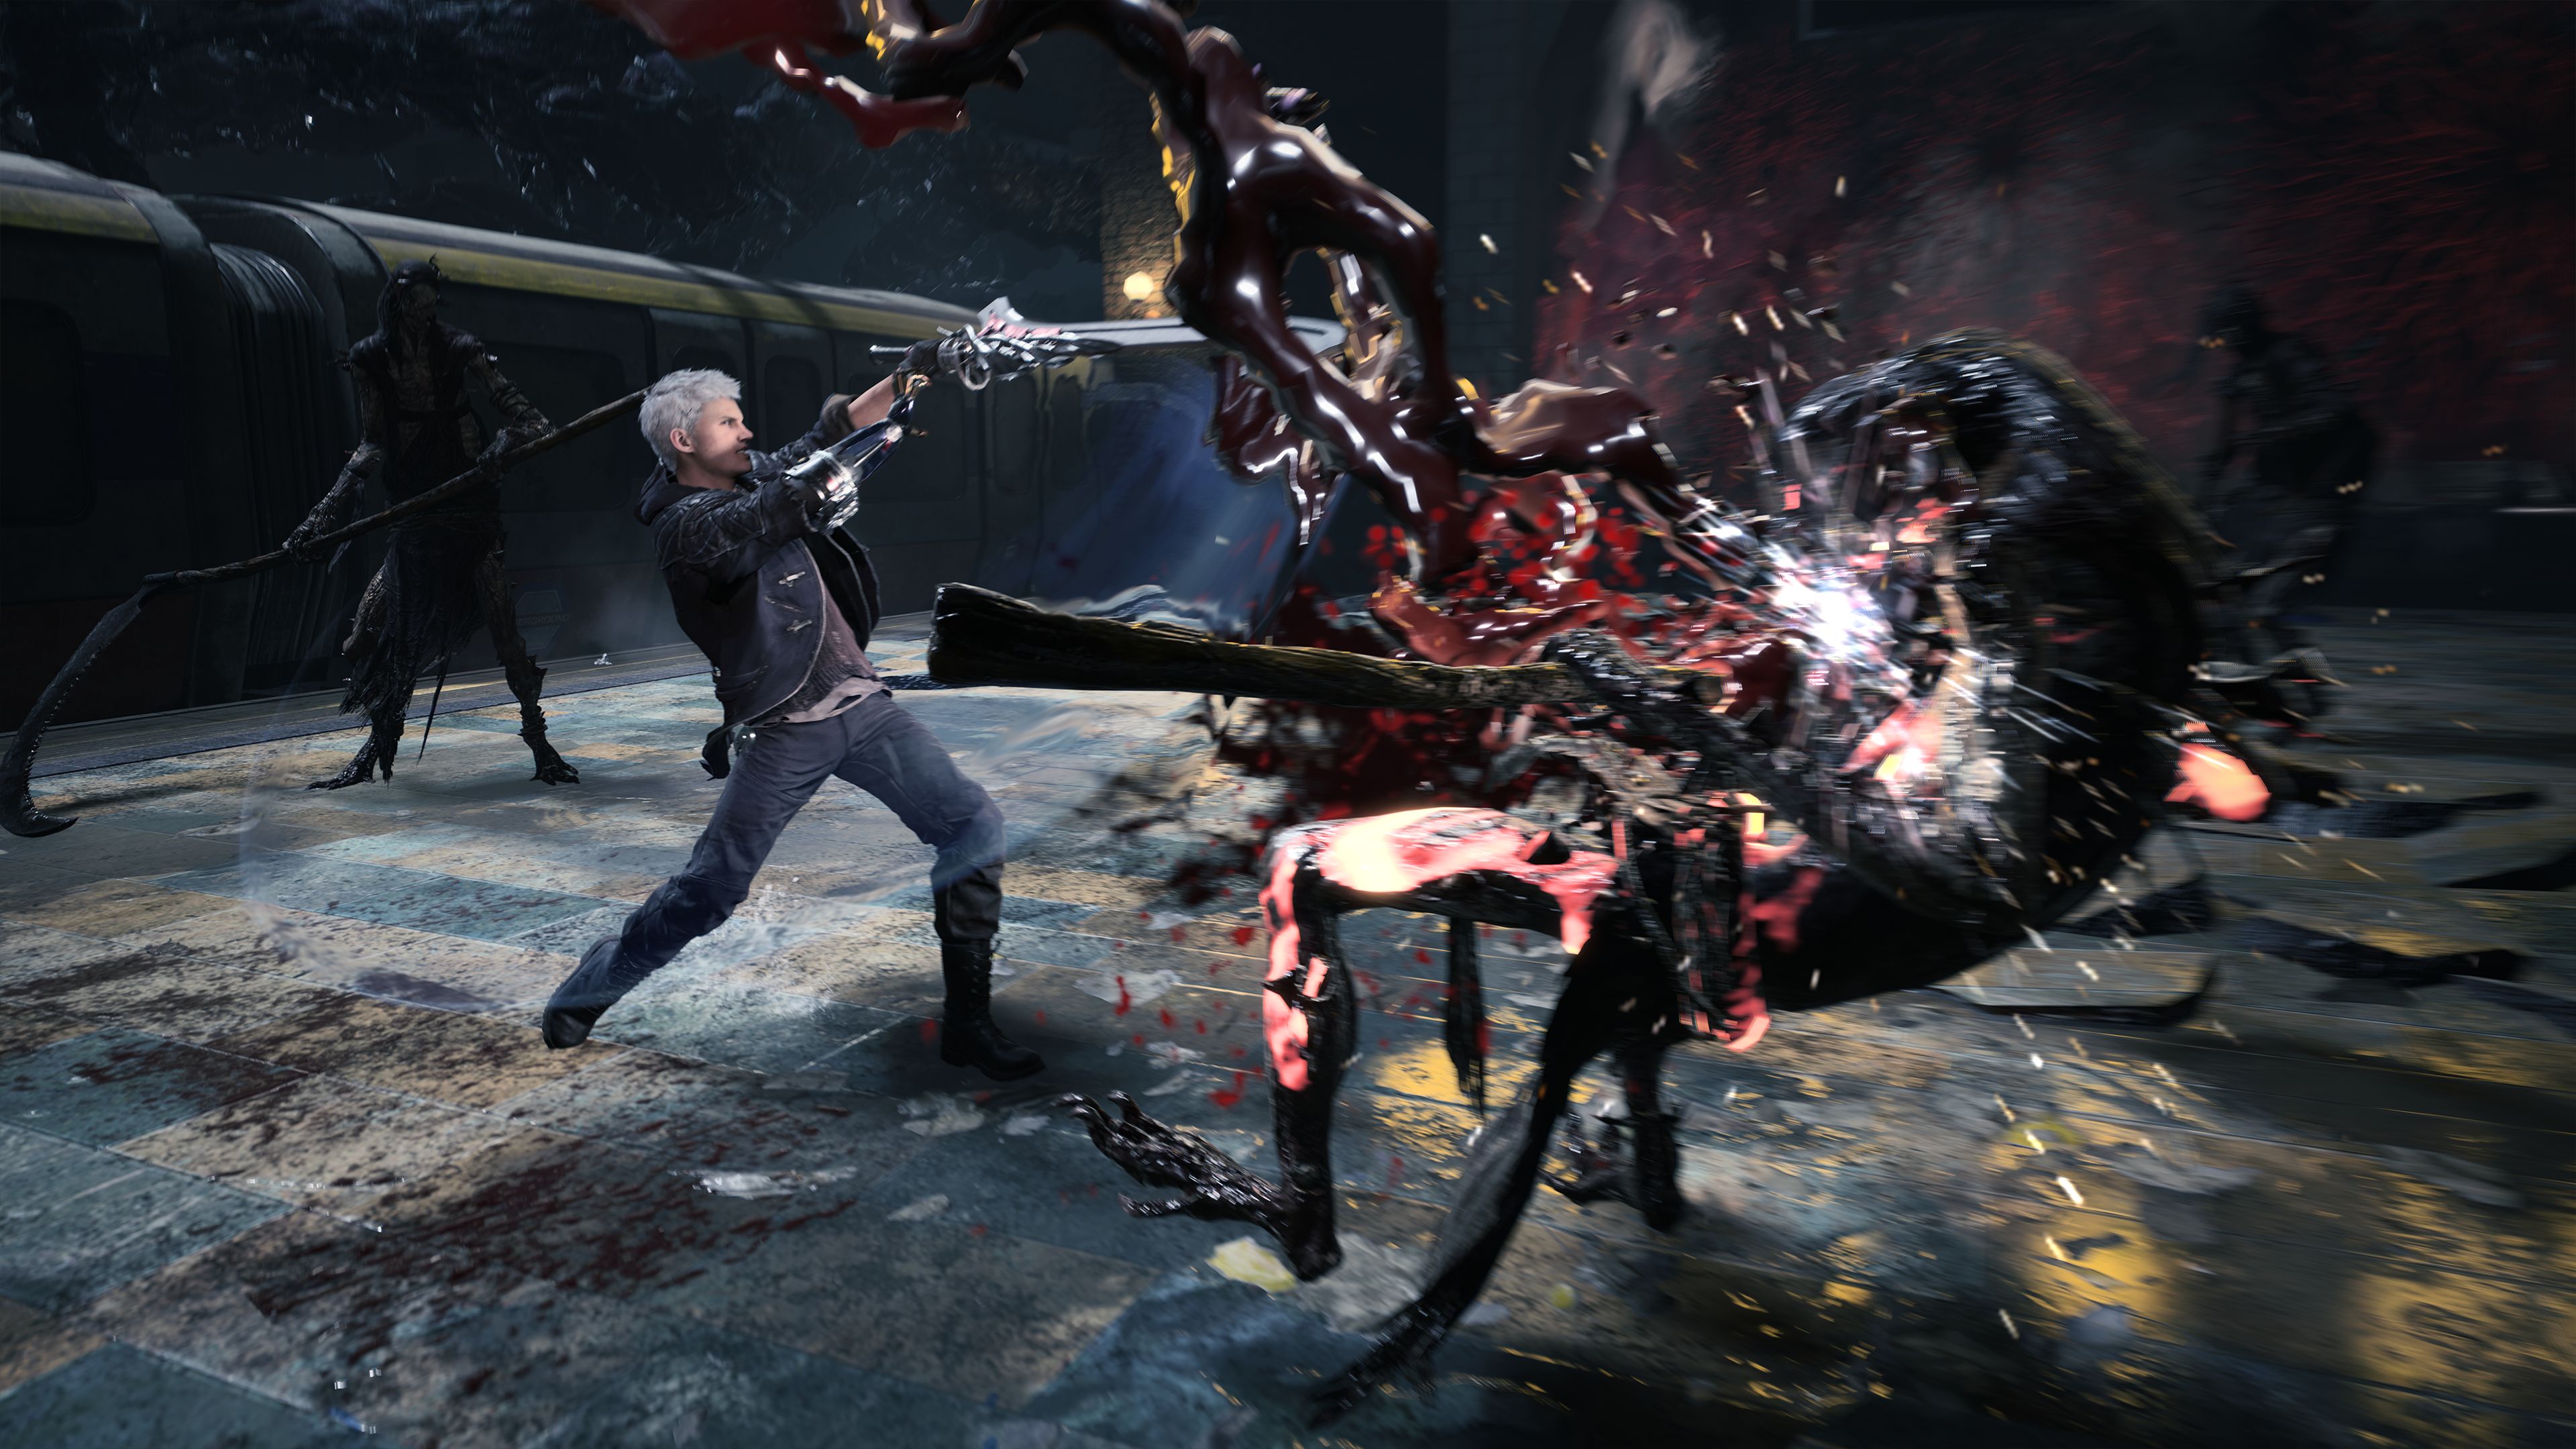 Handy-Wallpaper Devil May Cry, Computerspiele, Nero (Devil May Cry), Devil May Cry 5 kostenlos herunterladen.